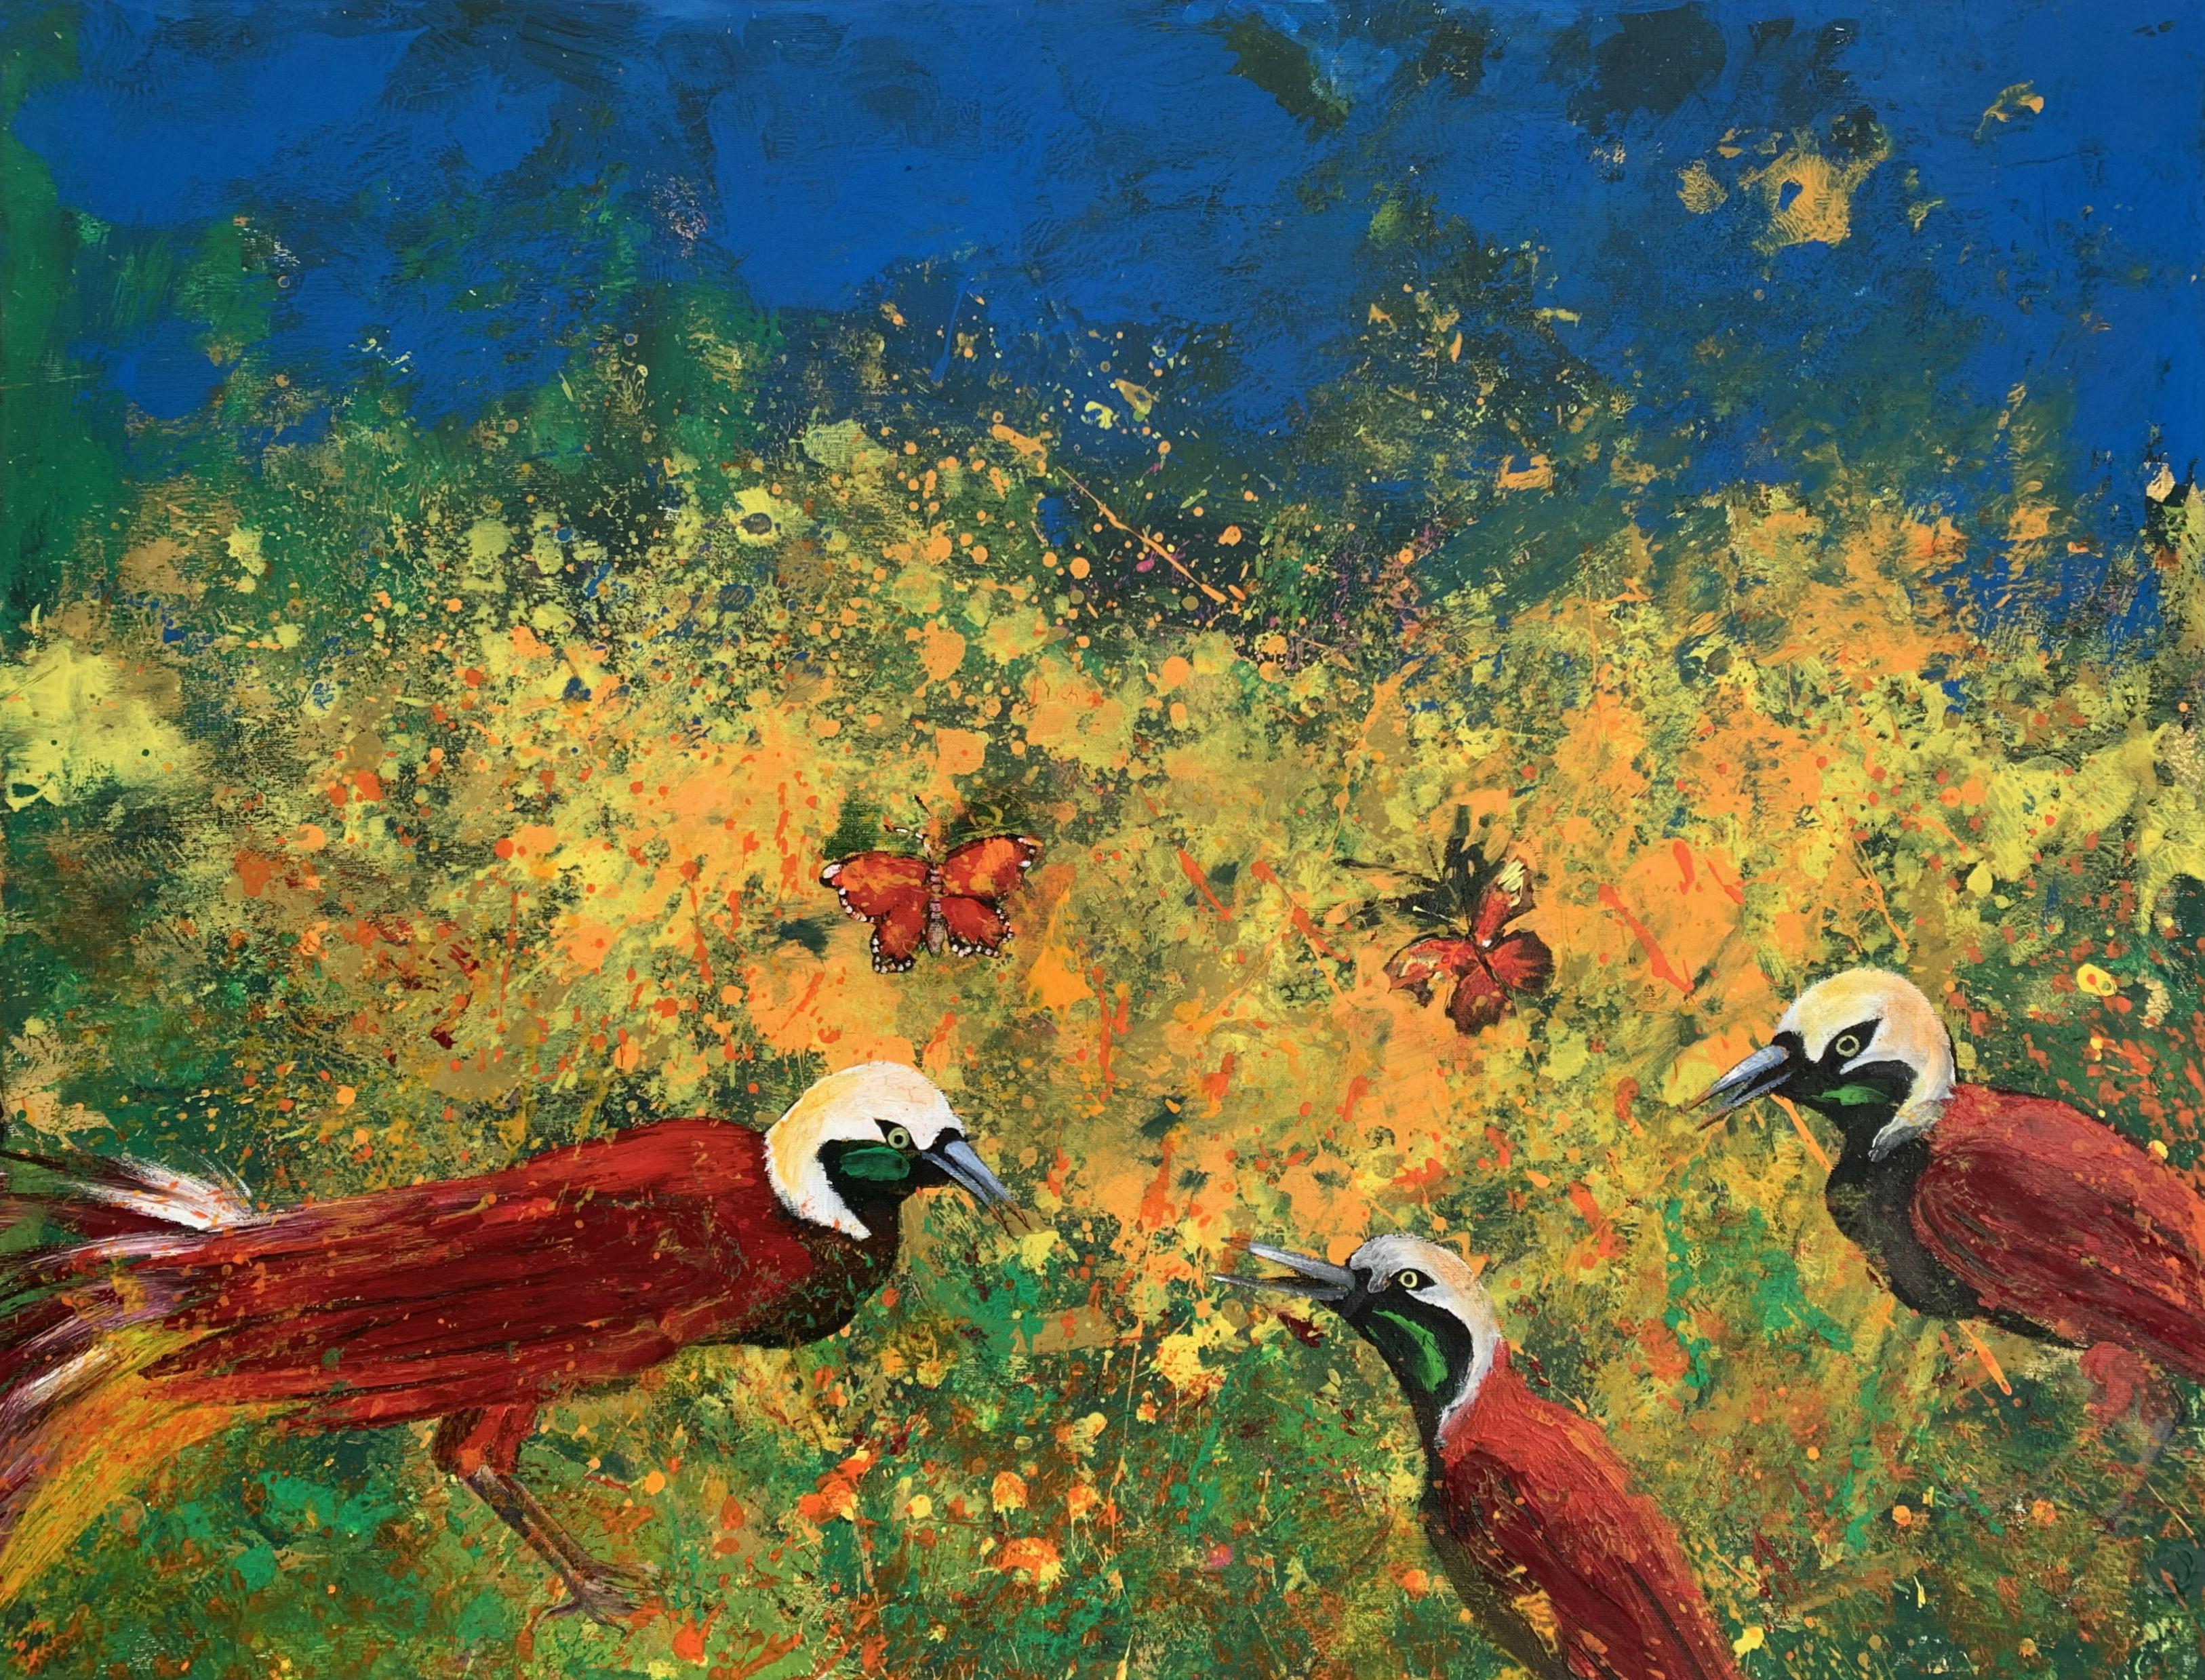 Gardens of Delight LVII - XXI century figurative oil painting, Birds, Colorful